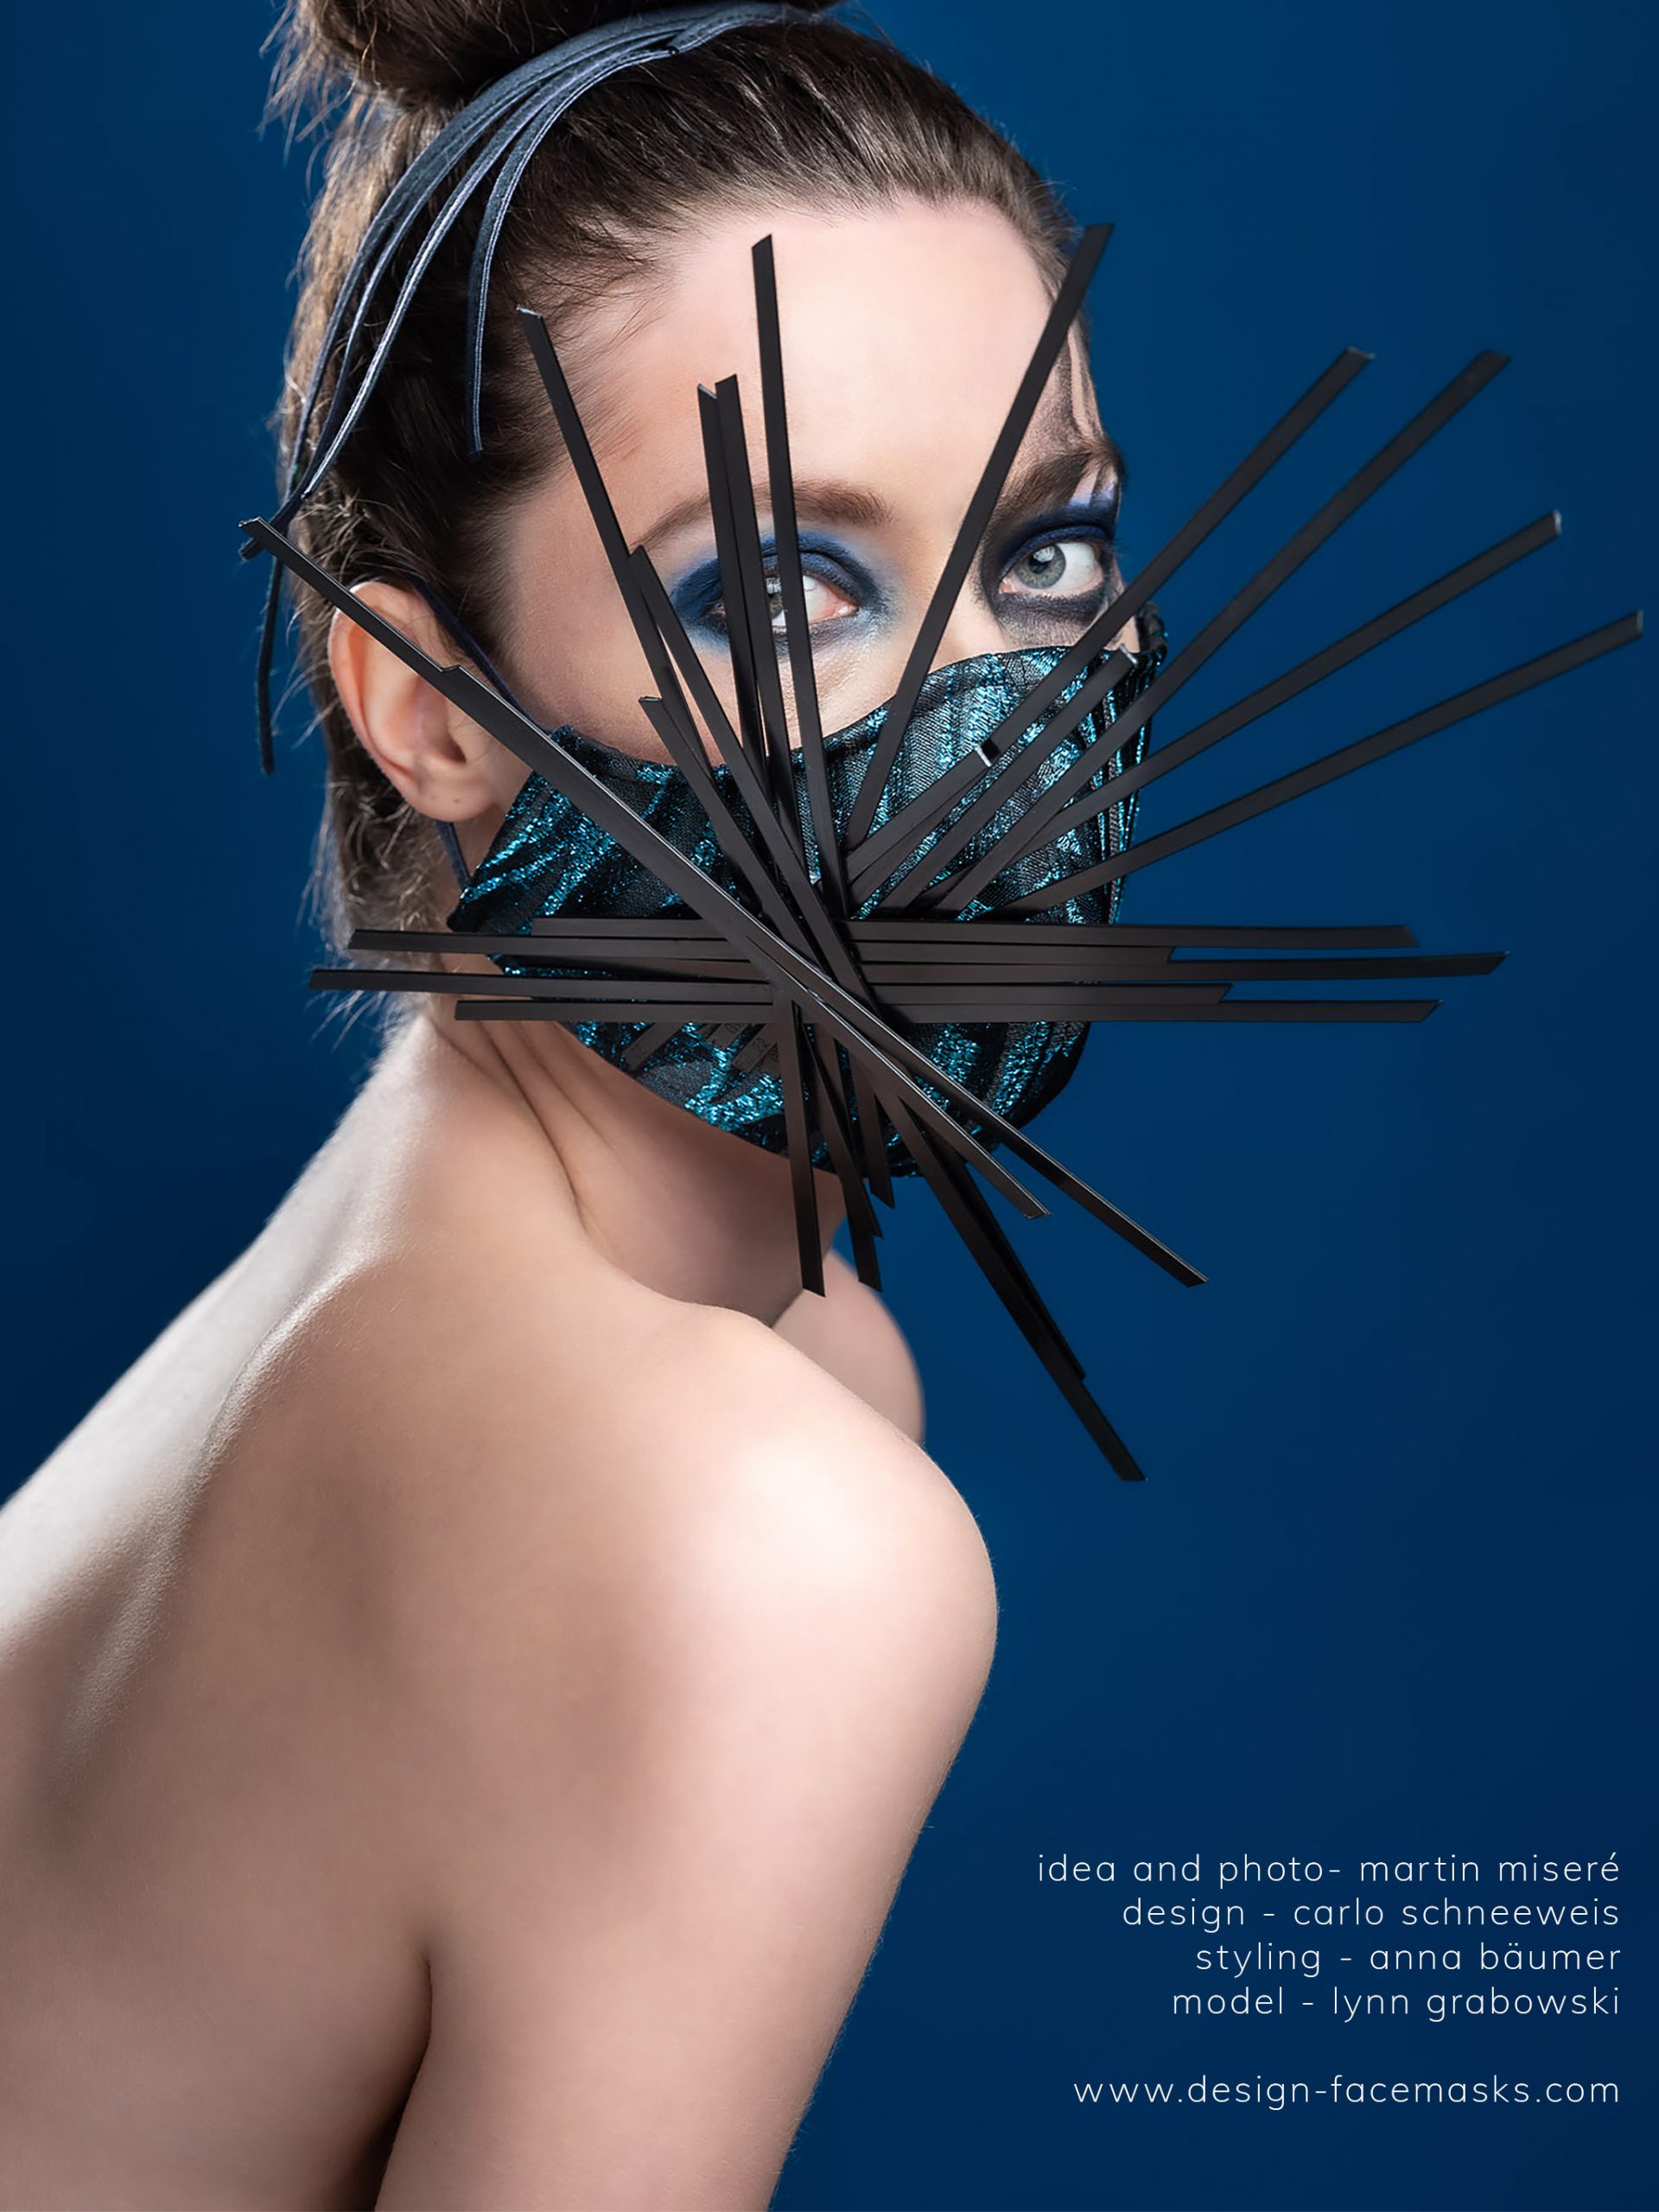 Design Facemask Model Lynn Grabowski wearing facemask of fashion designer Carlo Schneeweis photographed by Martin Misere